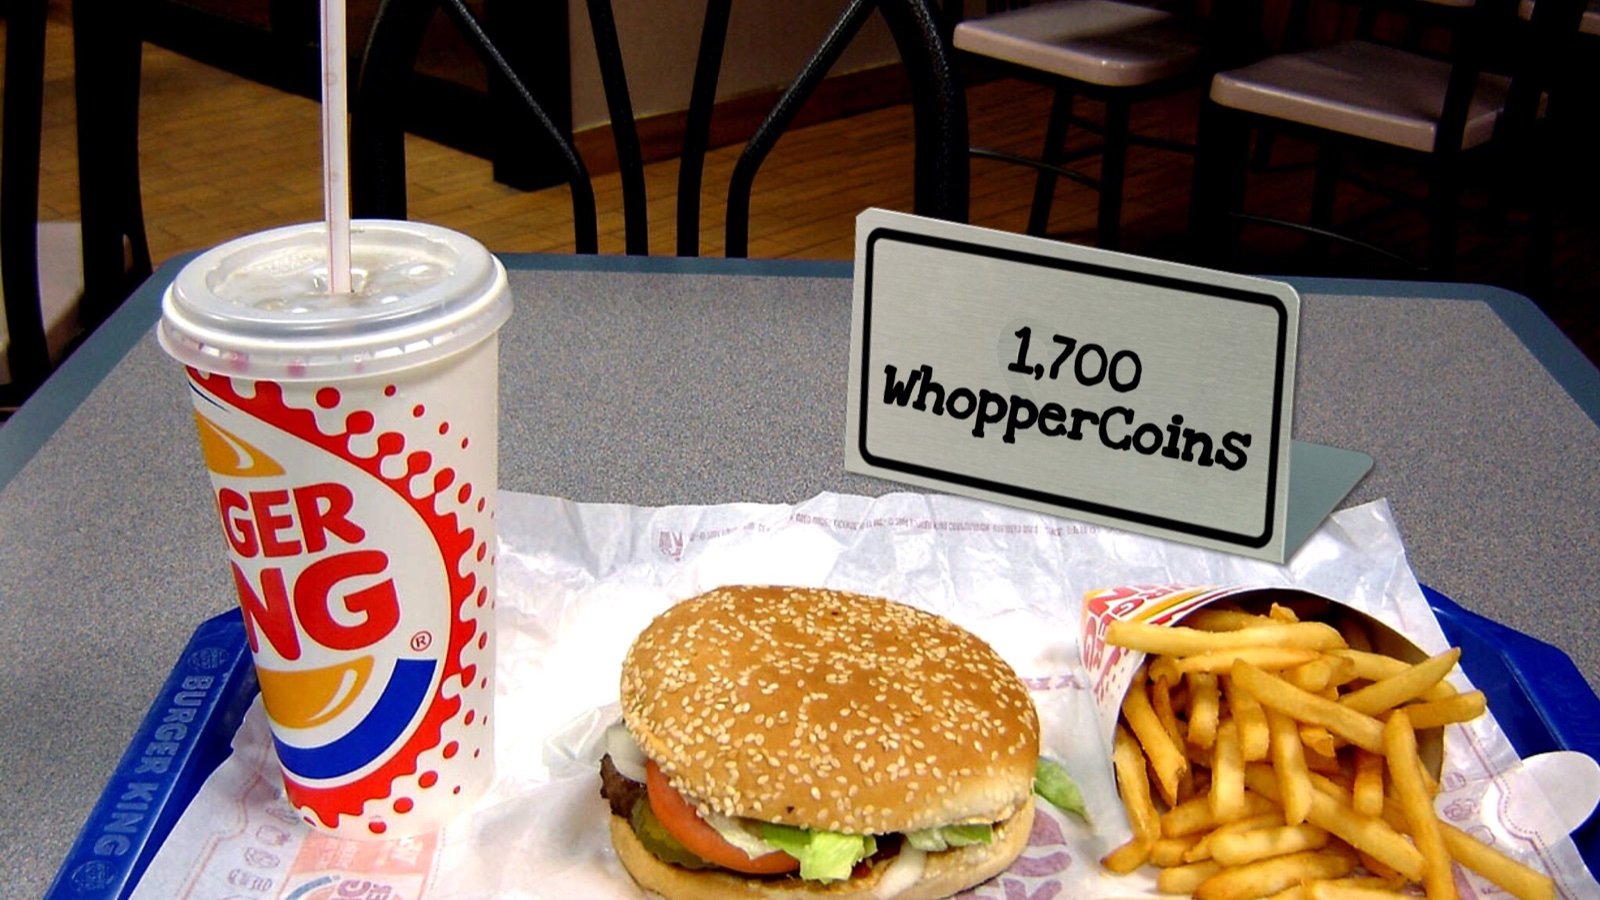  In Russia, you can buy a whopper for 1,700 WhopperCoins